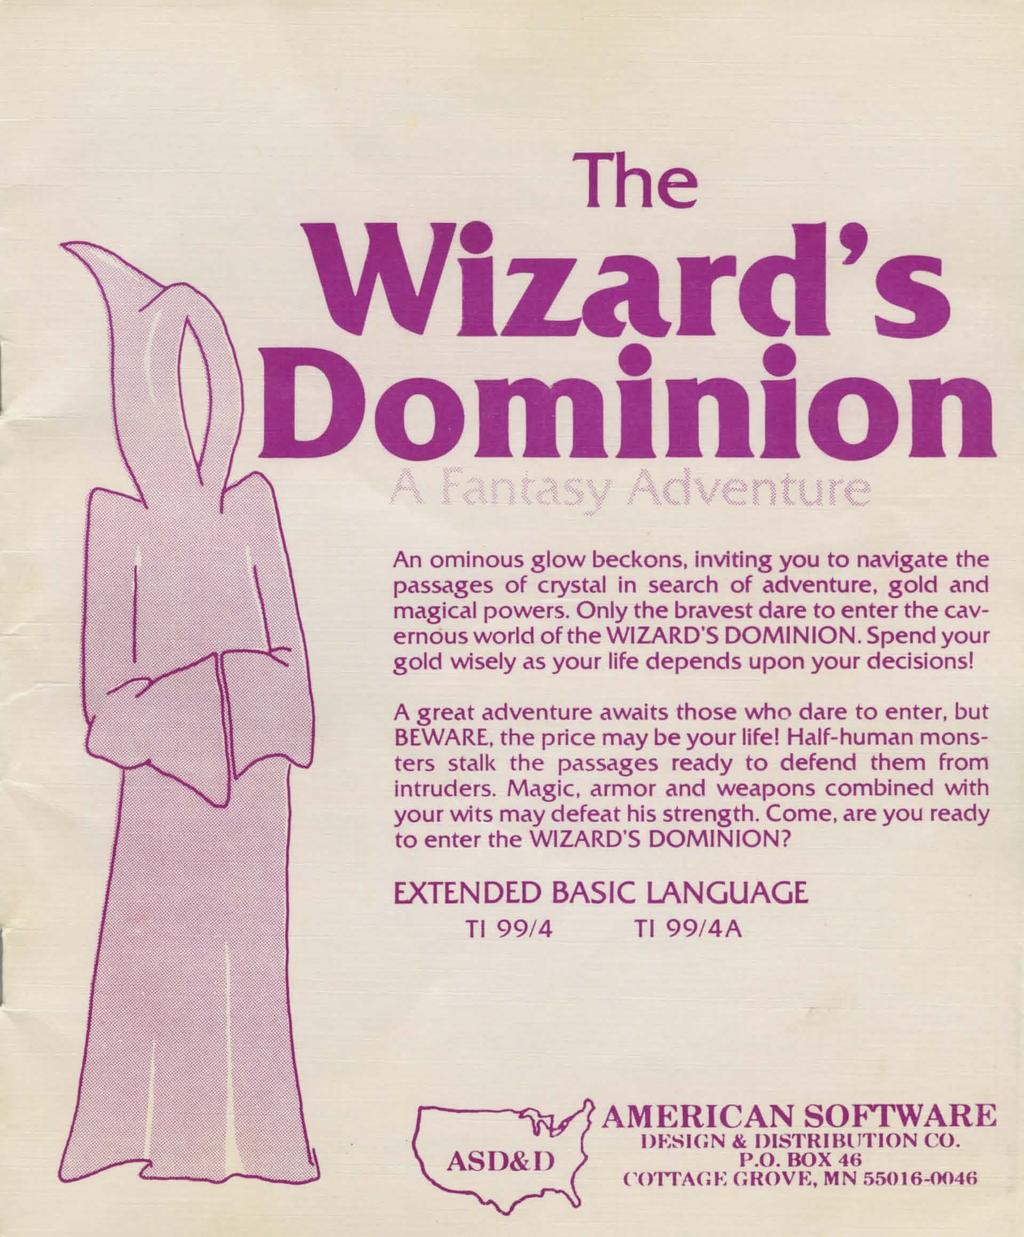 The Wizard's Dominion nt t An ominous glow beckons, inviting you to navigate the passages of crystal in search of adventure, gold and magical powers.